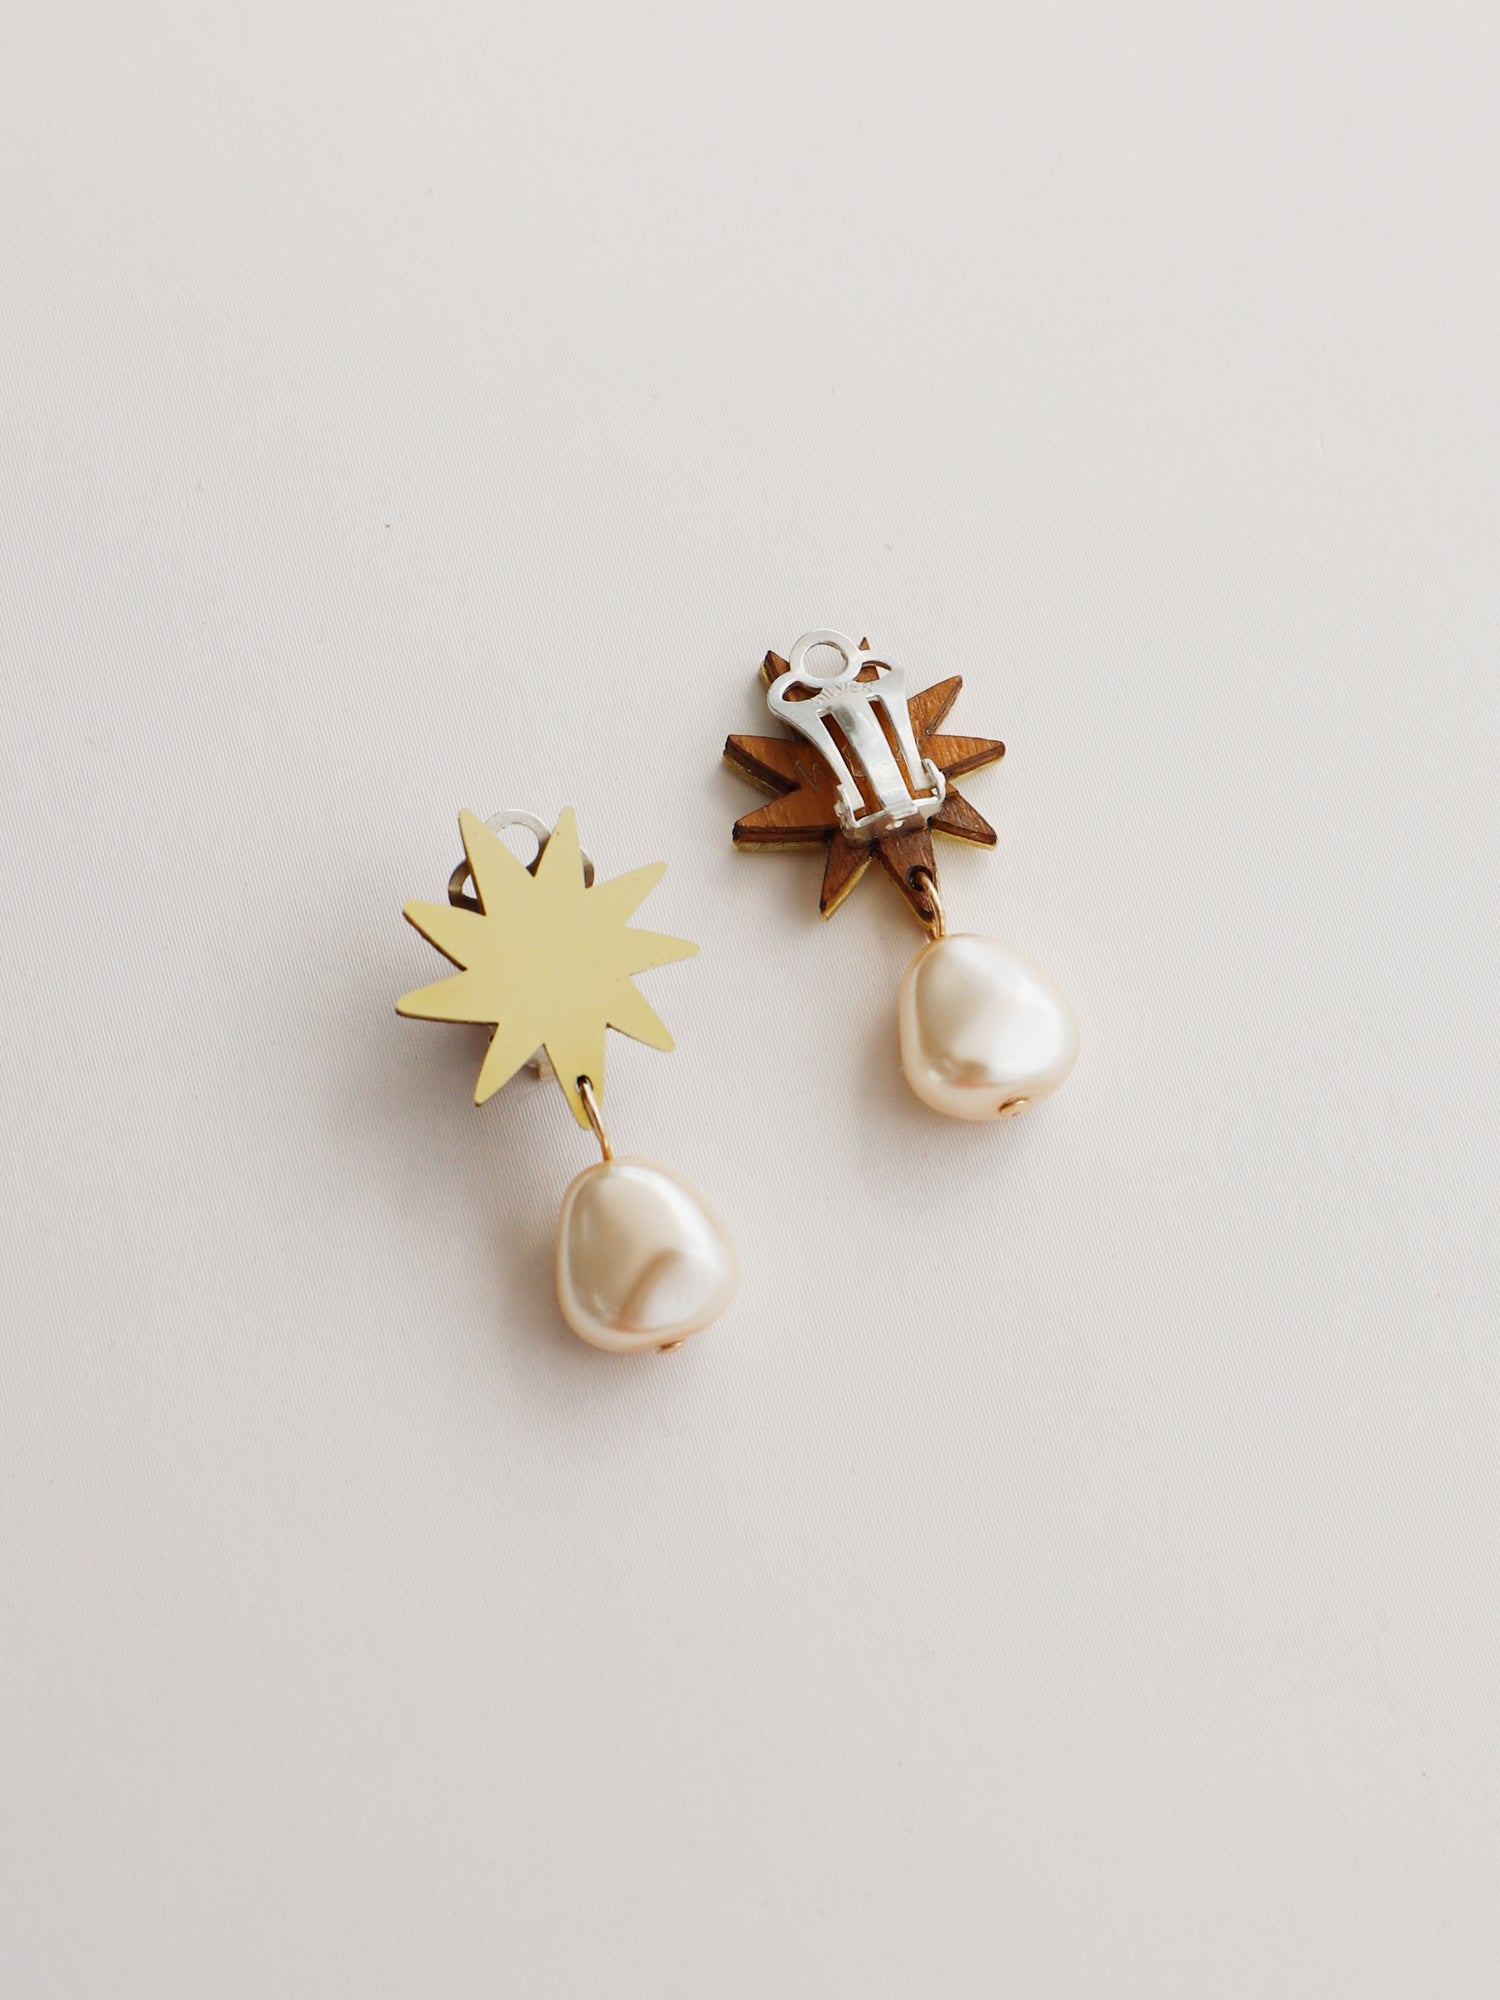 Playful pendant, inspired by Matisse's cutout-style stars. Made in brass with our signature wood base, Czech glass baroque pearl and 14k gold-filled chain. Handmade in the UK by Wolf & Moon.